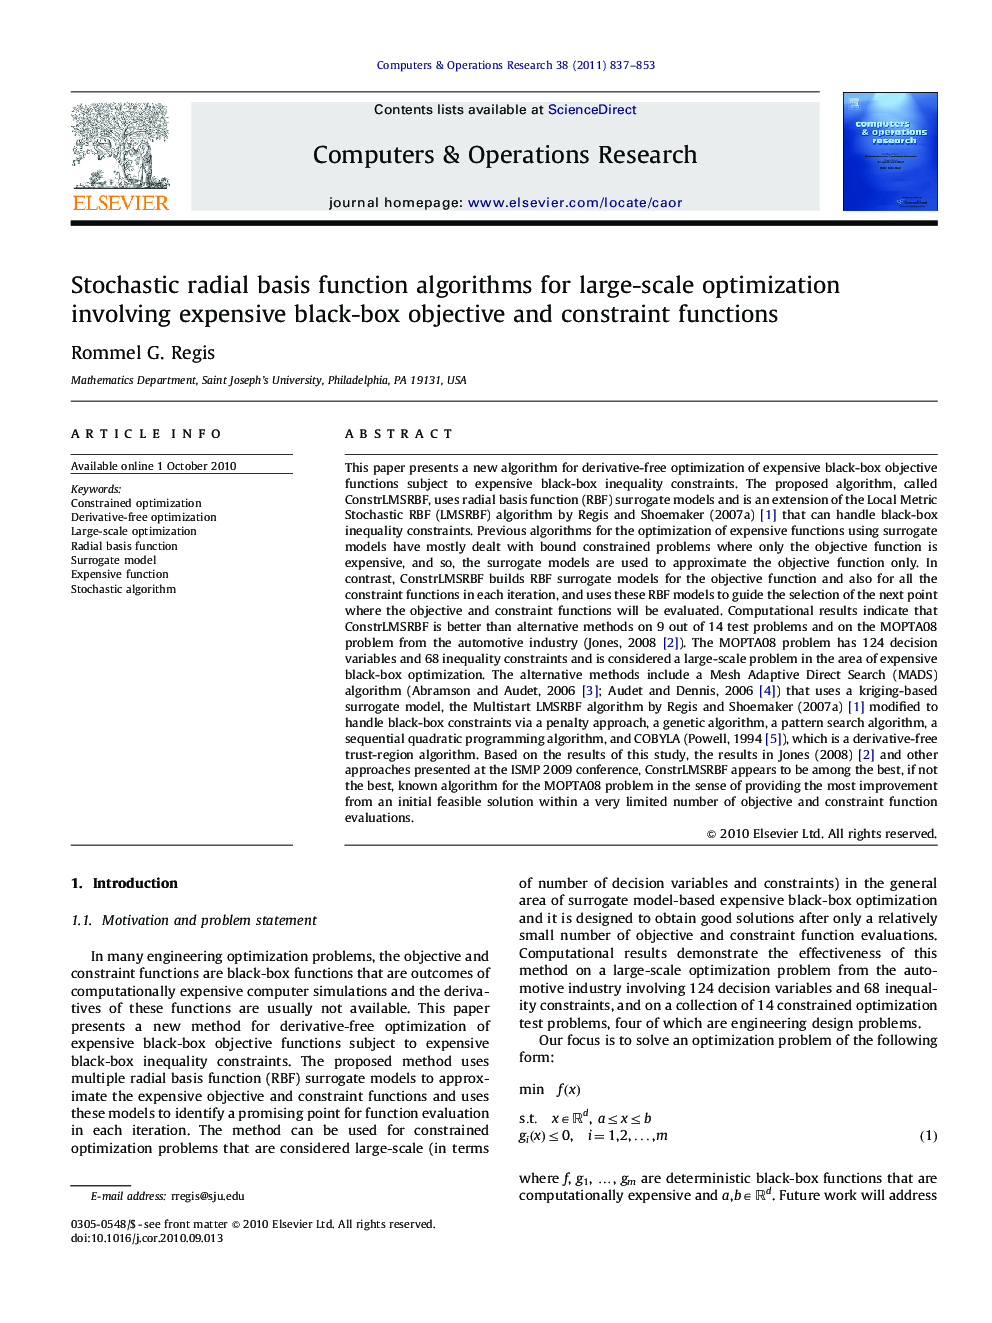 Stochastic radial basis function algorithms for large-scale optimization involving expensive black-box objective and constraint functions